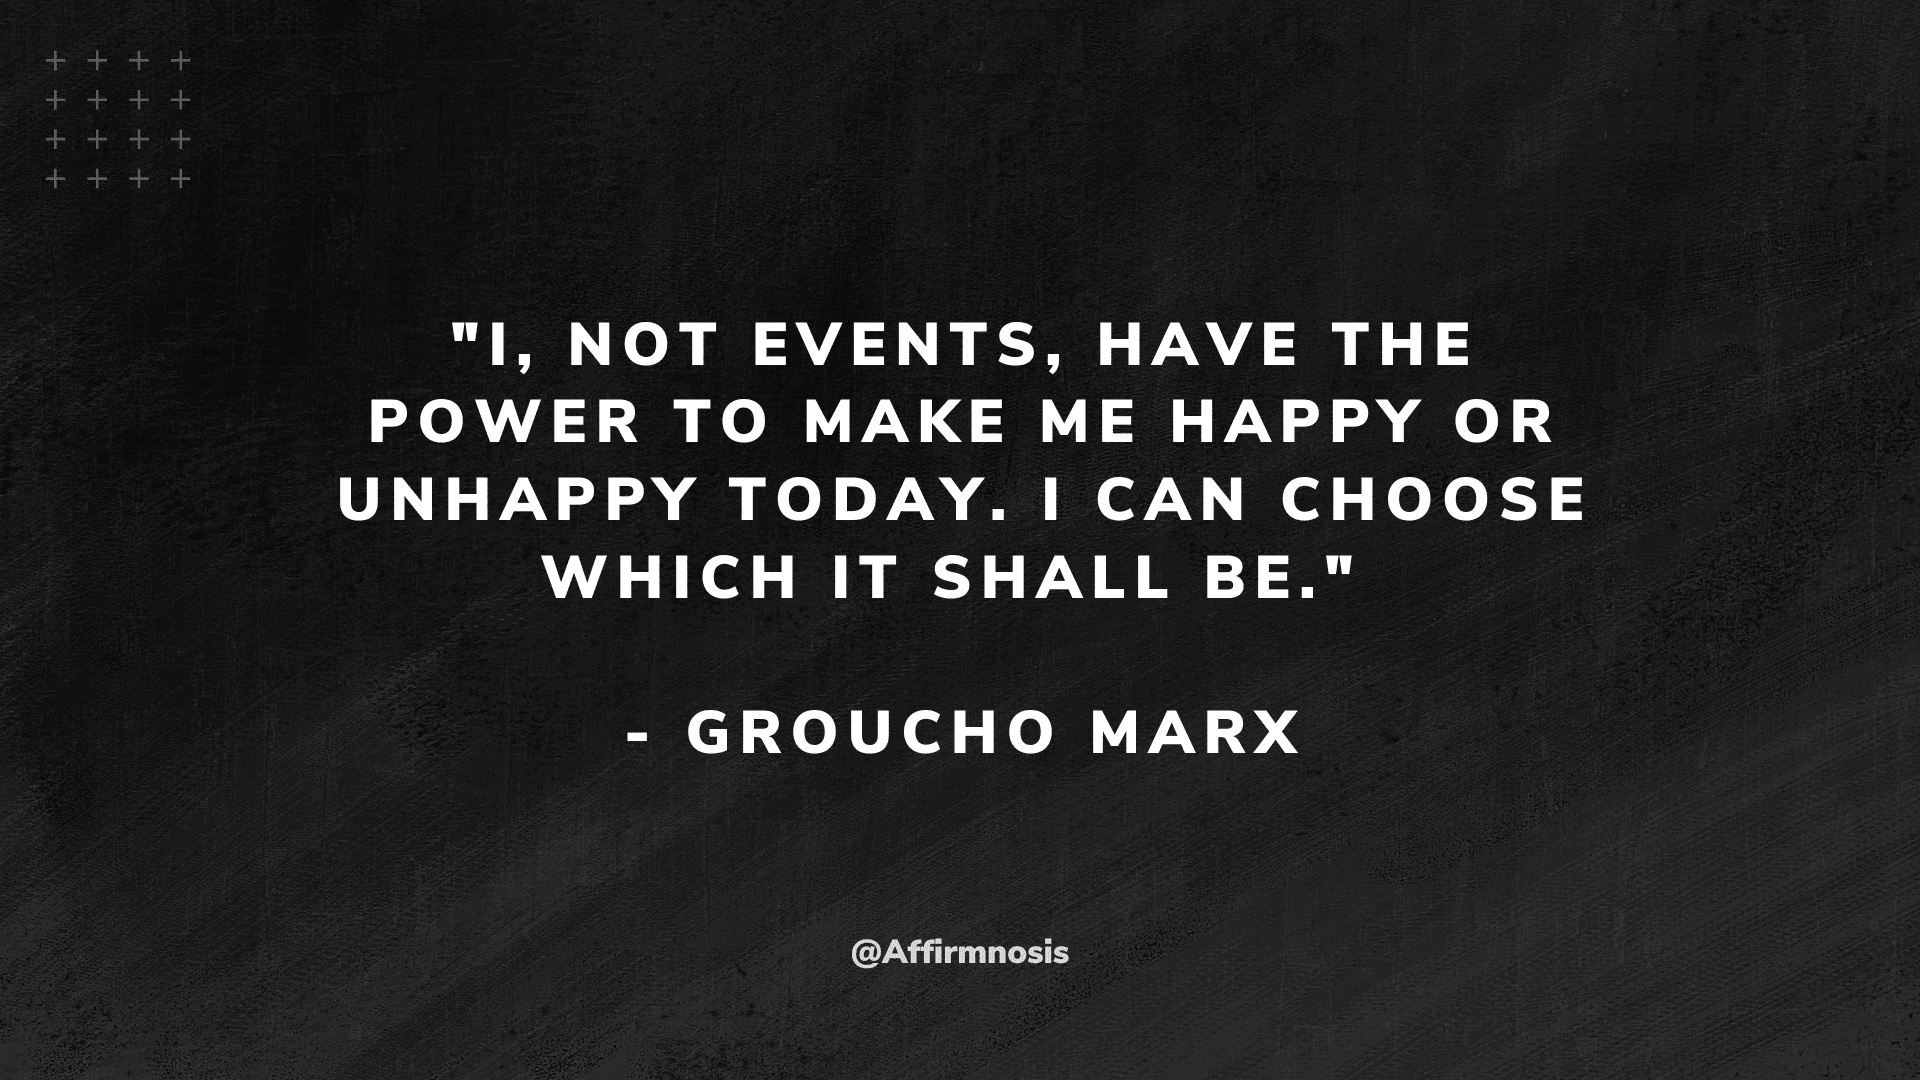 I, not events, have the power to make me happy or unhappy today. I can choose which it shall be. - Groucho Marx